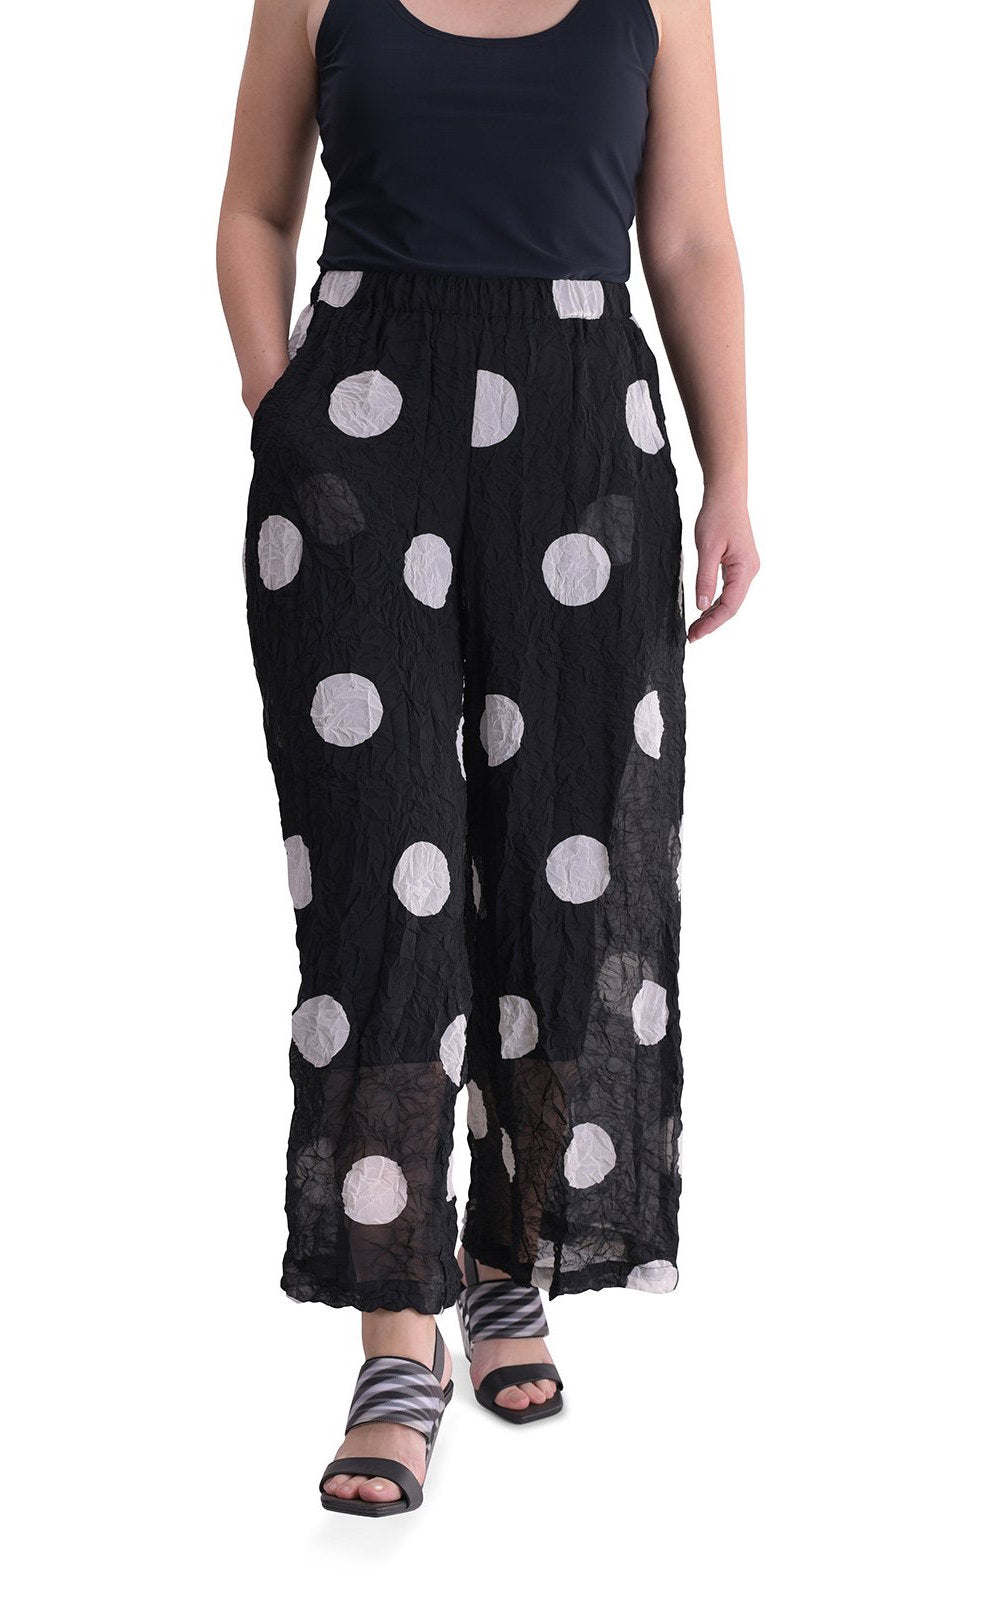 Front full body view of a woman wearing the alembika chiffon dot palazzo pant with a black tank. The pant is black with white dots. The fabric appears sheer. The pants are wide legged and end right above the ankles.